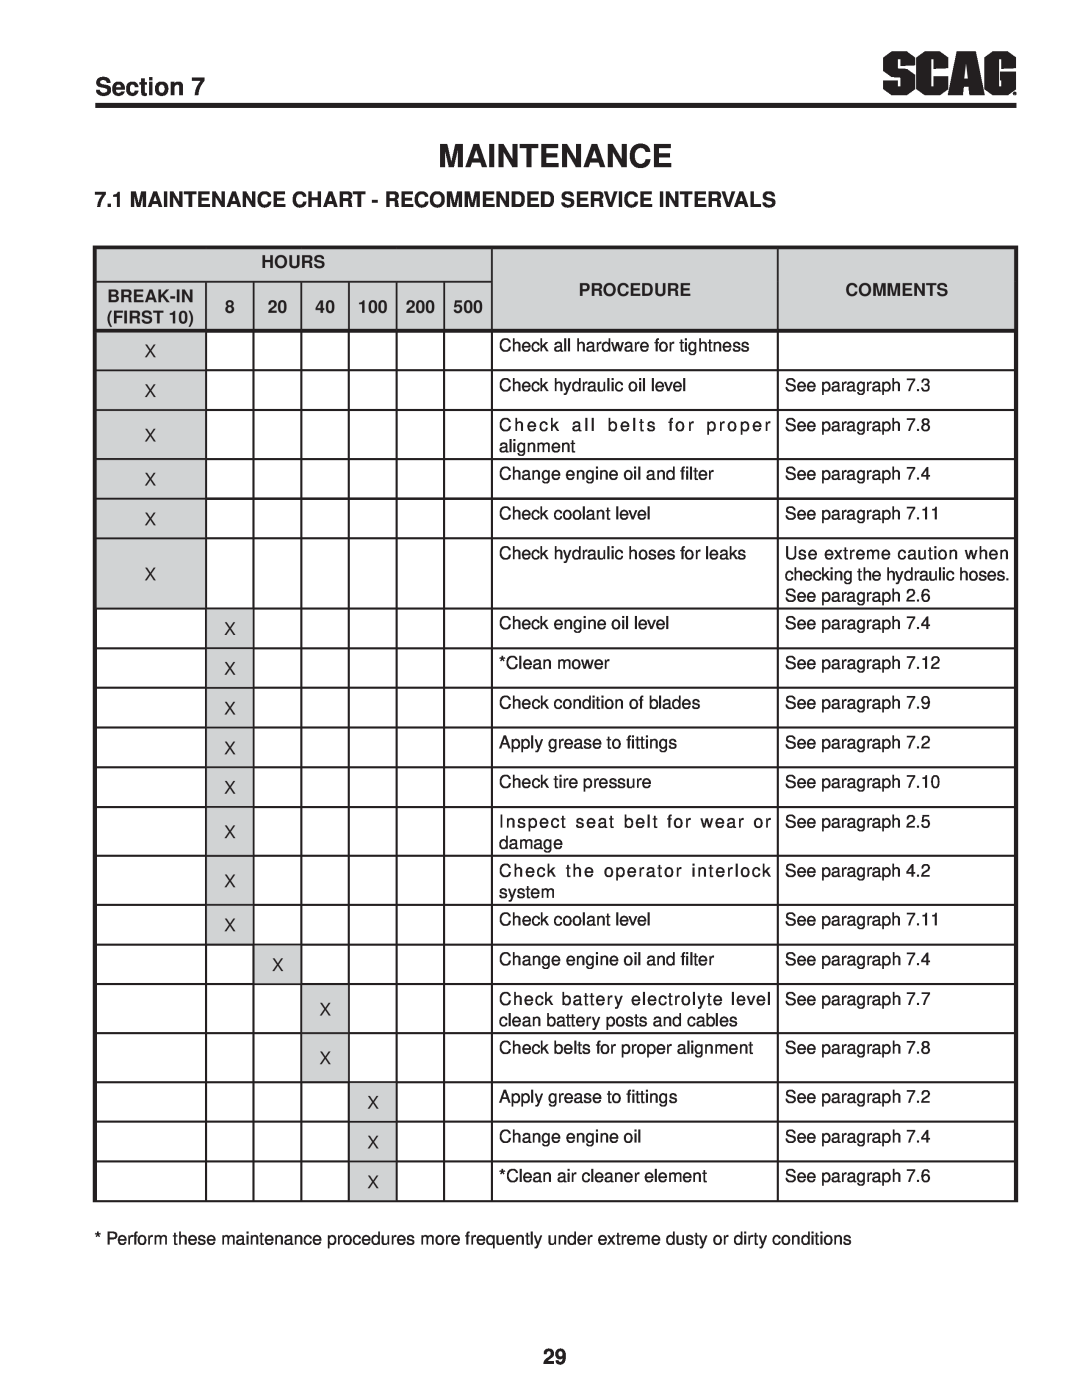 Scag Power Equipment STWC48V-25CV, STWC48V-26KA-LC Maintenance Chart - Recommended Service Intervals, Section 